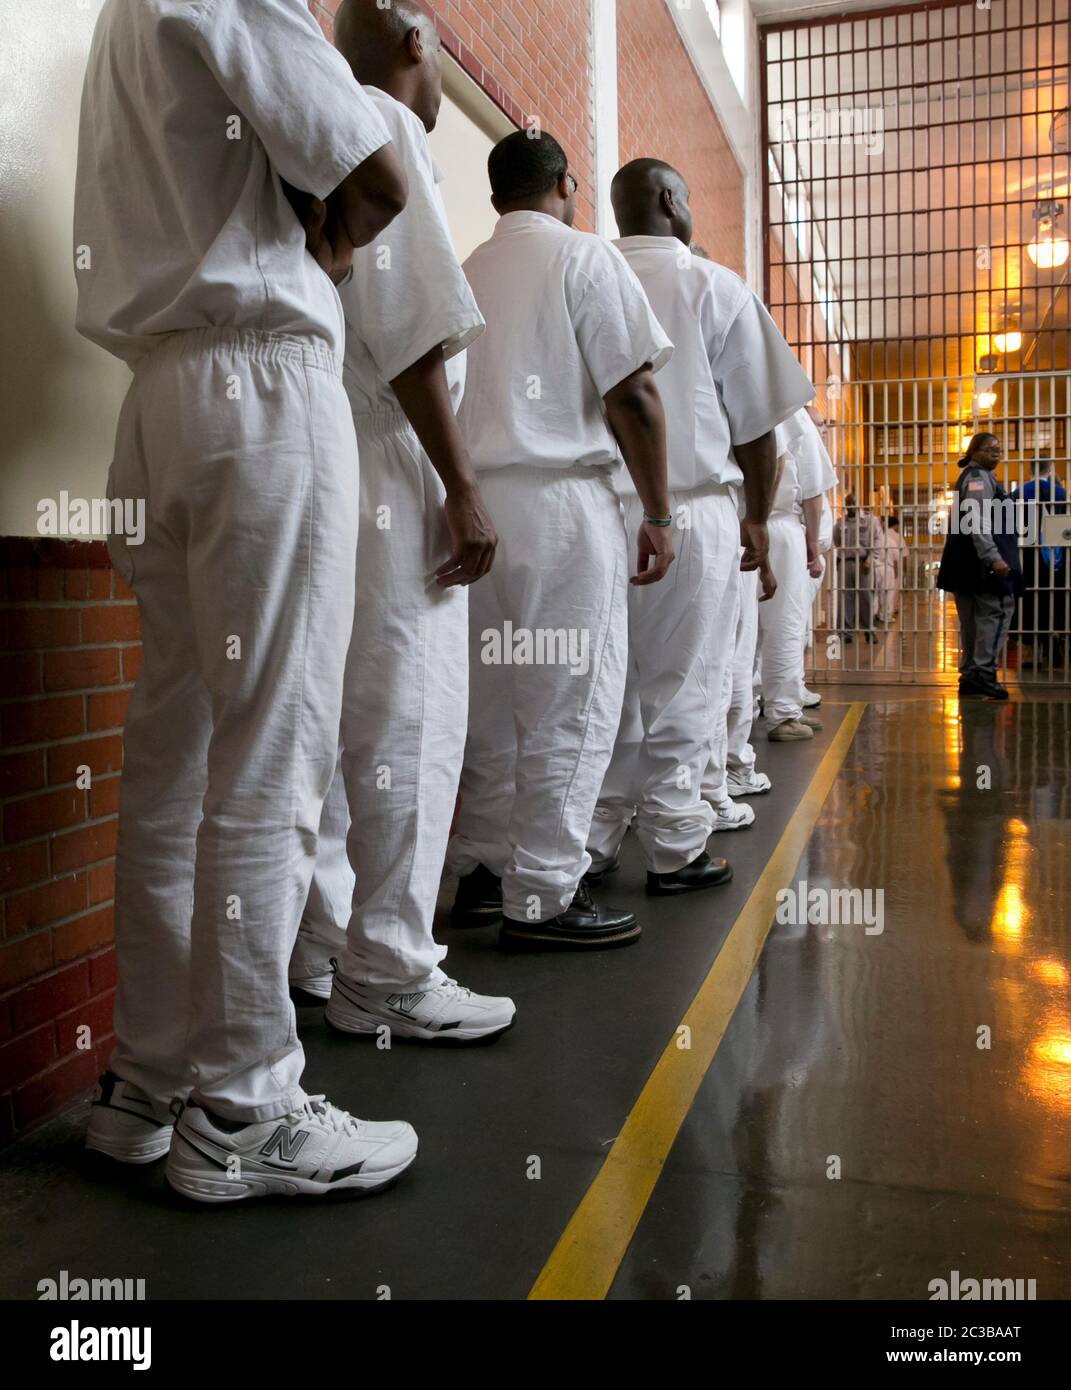 Rosharon Texas USA, August 25 2014: Uniformed male inmates, students of the Southwestern Baptist Theological Seminary program inside Darrington prison, line up in a hallway monitored by prison guards before entering their classroom.  ©Marjorie Kamys Cotera/Daemmrich Photography Stock Photo